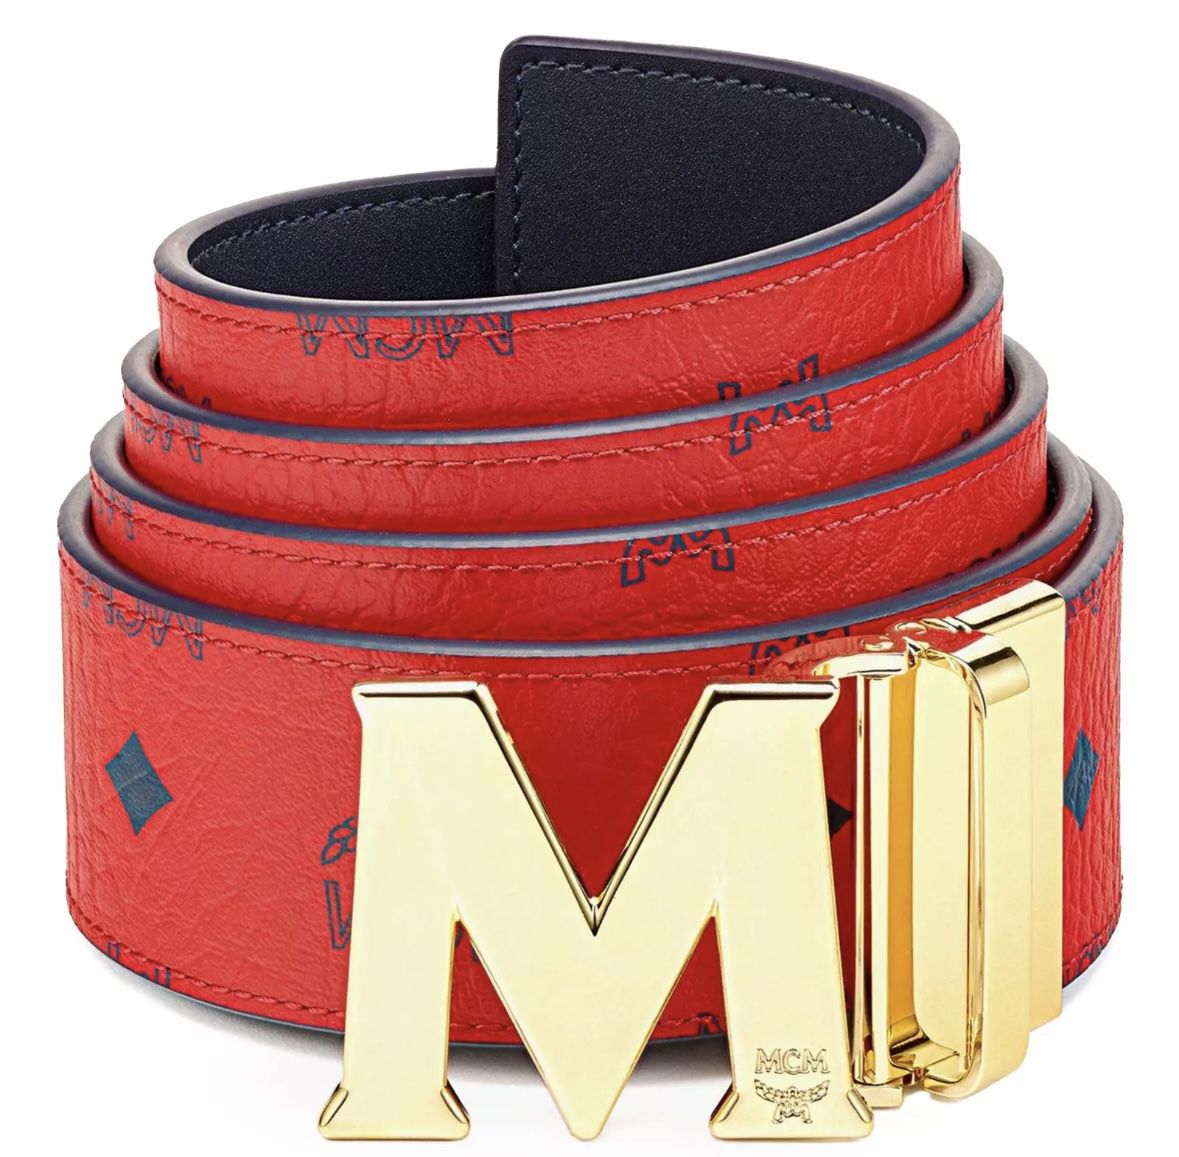 MCM CLAUS TEXTURED REVERSIBLE BELT 1.75" IN VISETOS CANDY RED/NAVY BLUE